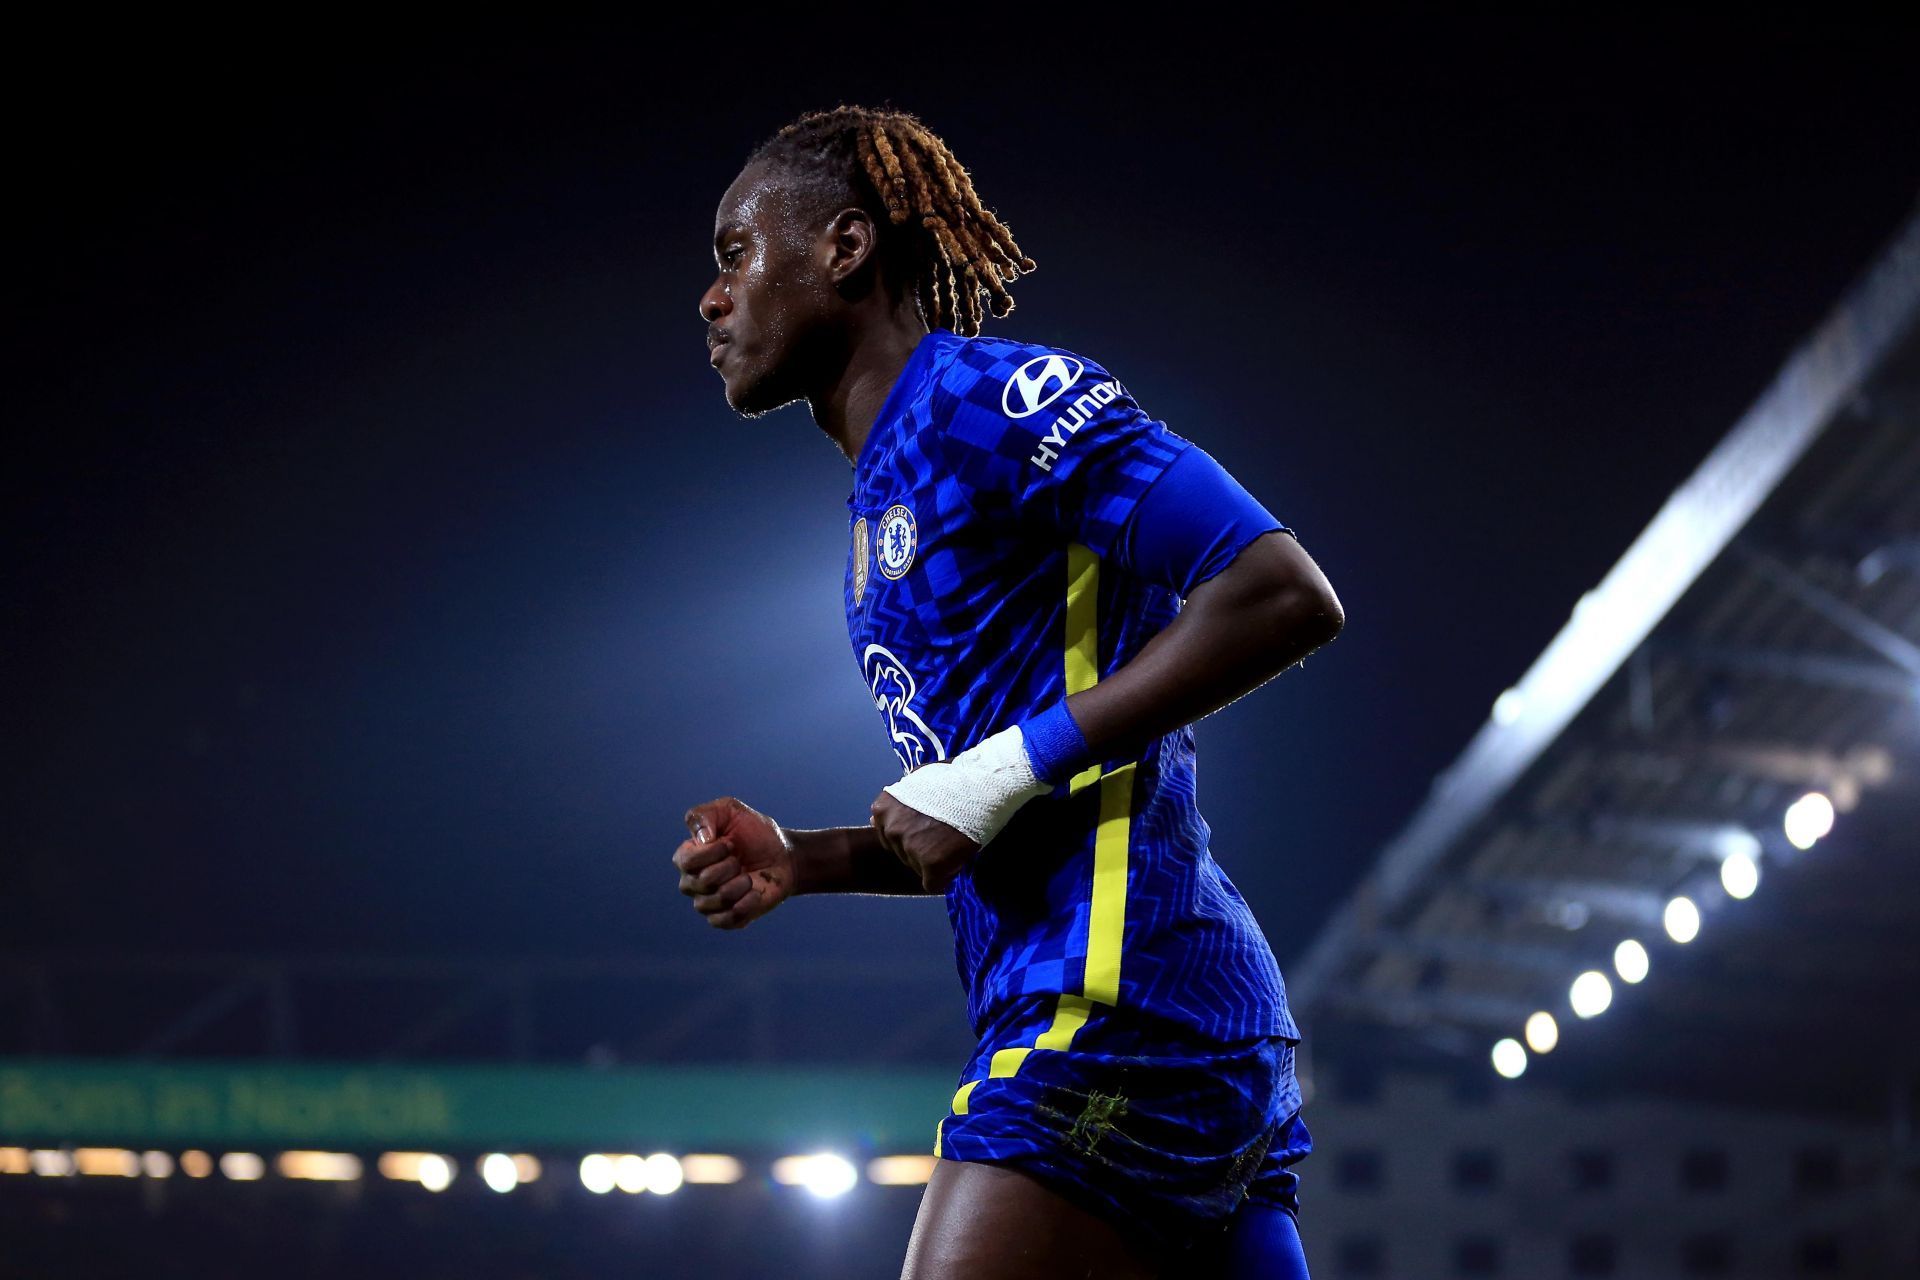 Trevoh Chalobah is one to look out for next season